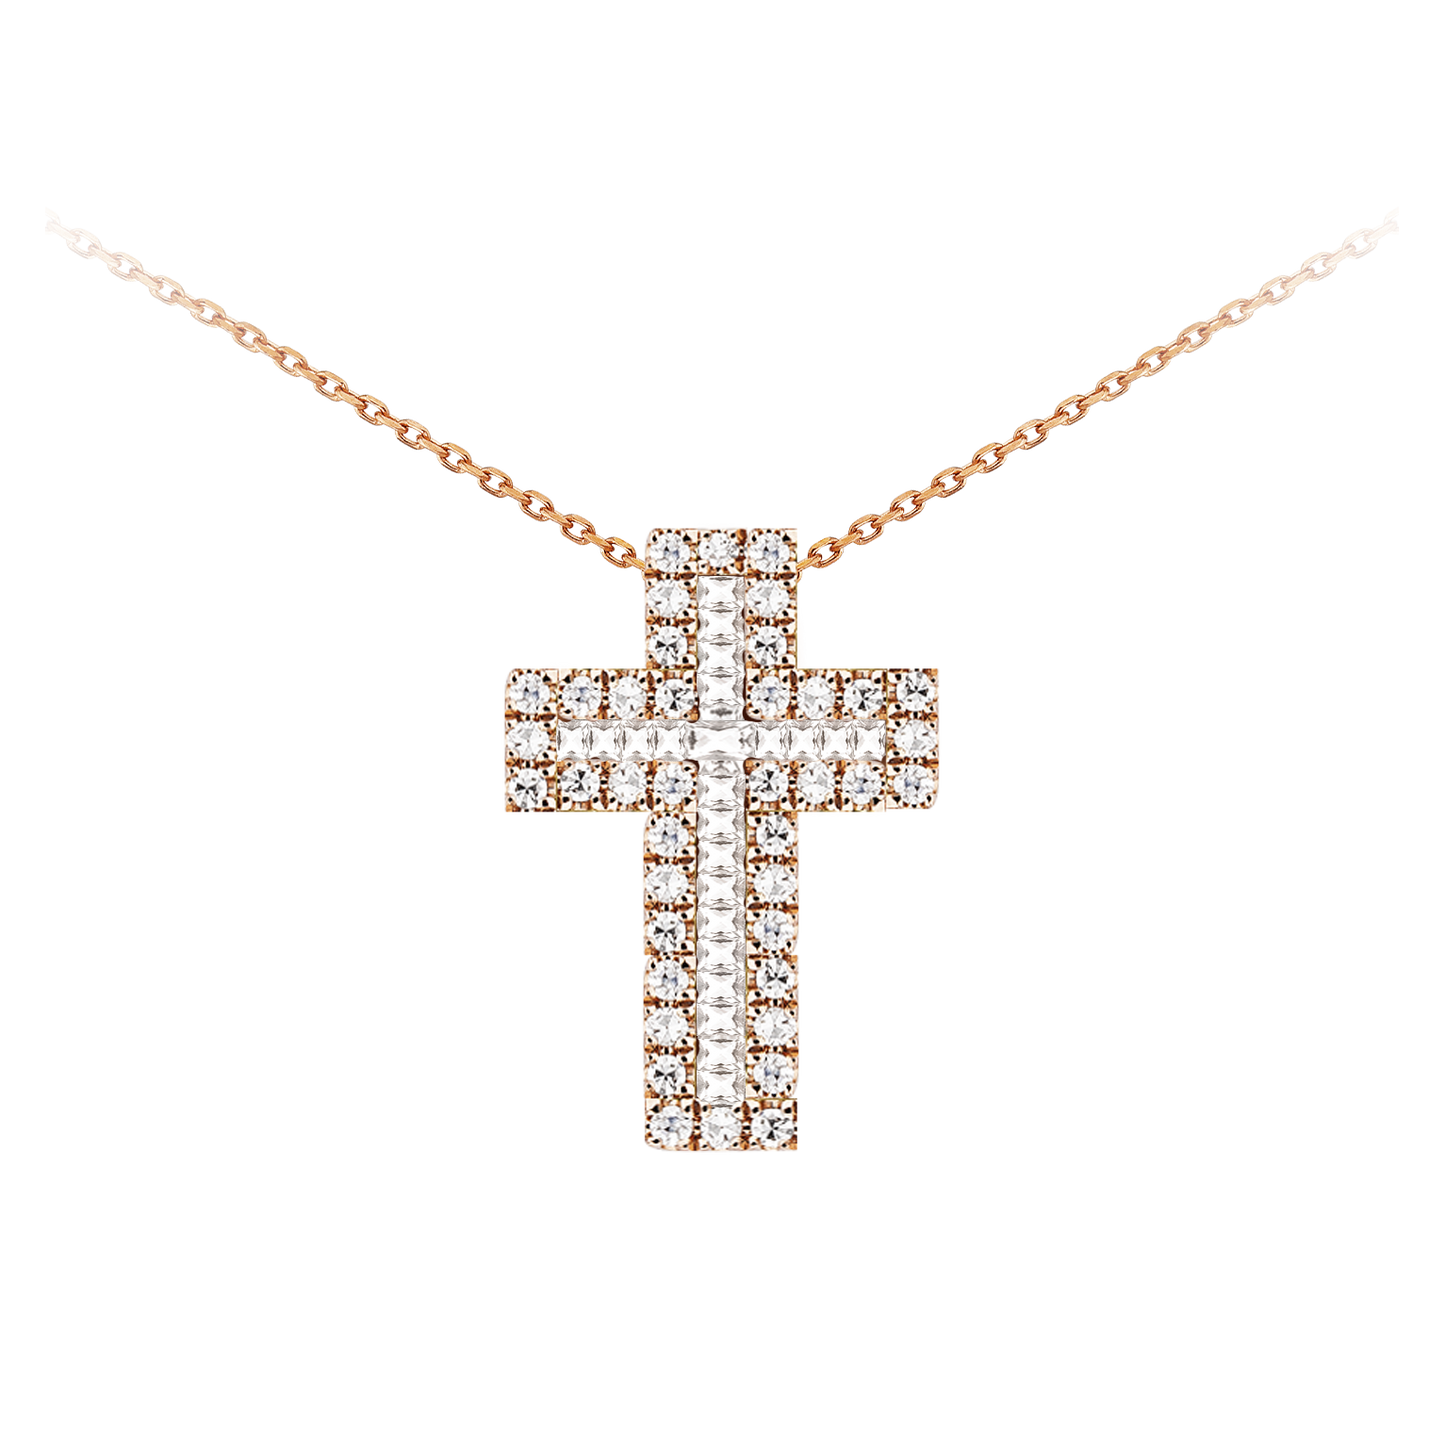 15mm Diamond Baguette Cross Necklace in 9ct Rose Gold